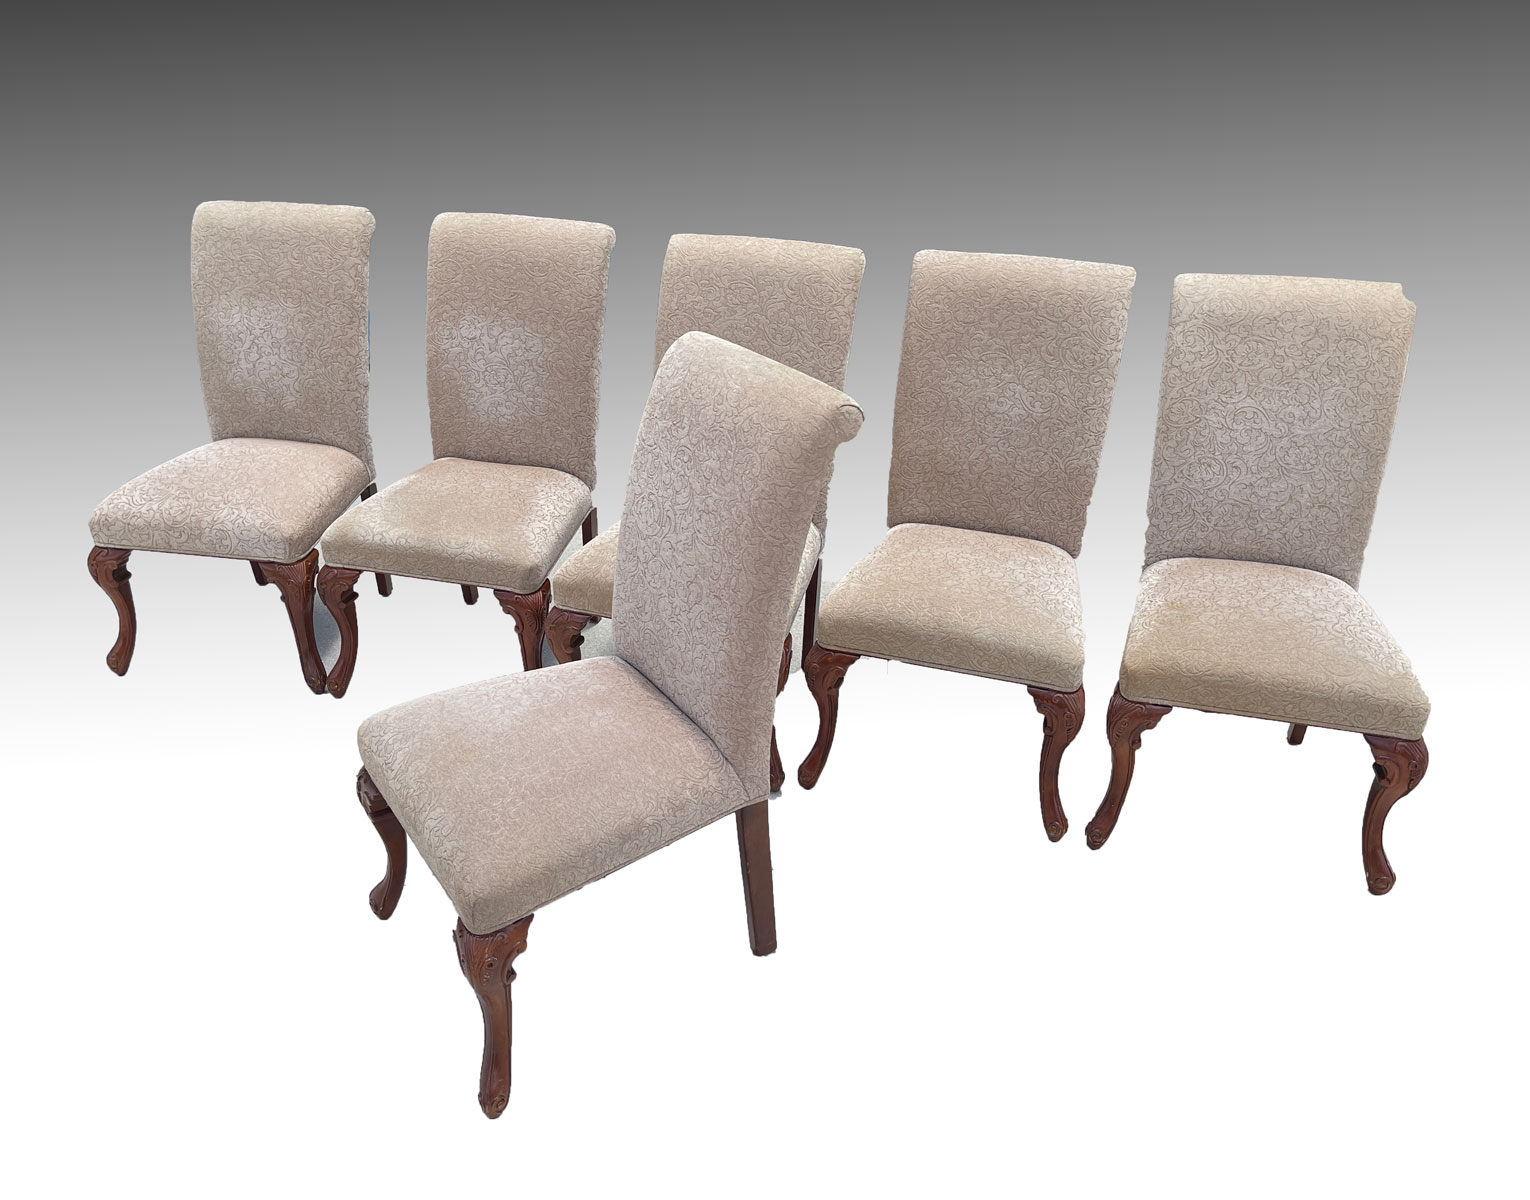 6 UPHOLSTERED DINING CHAIRS Upholstered 36c425